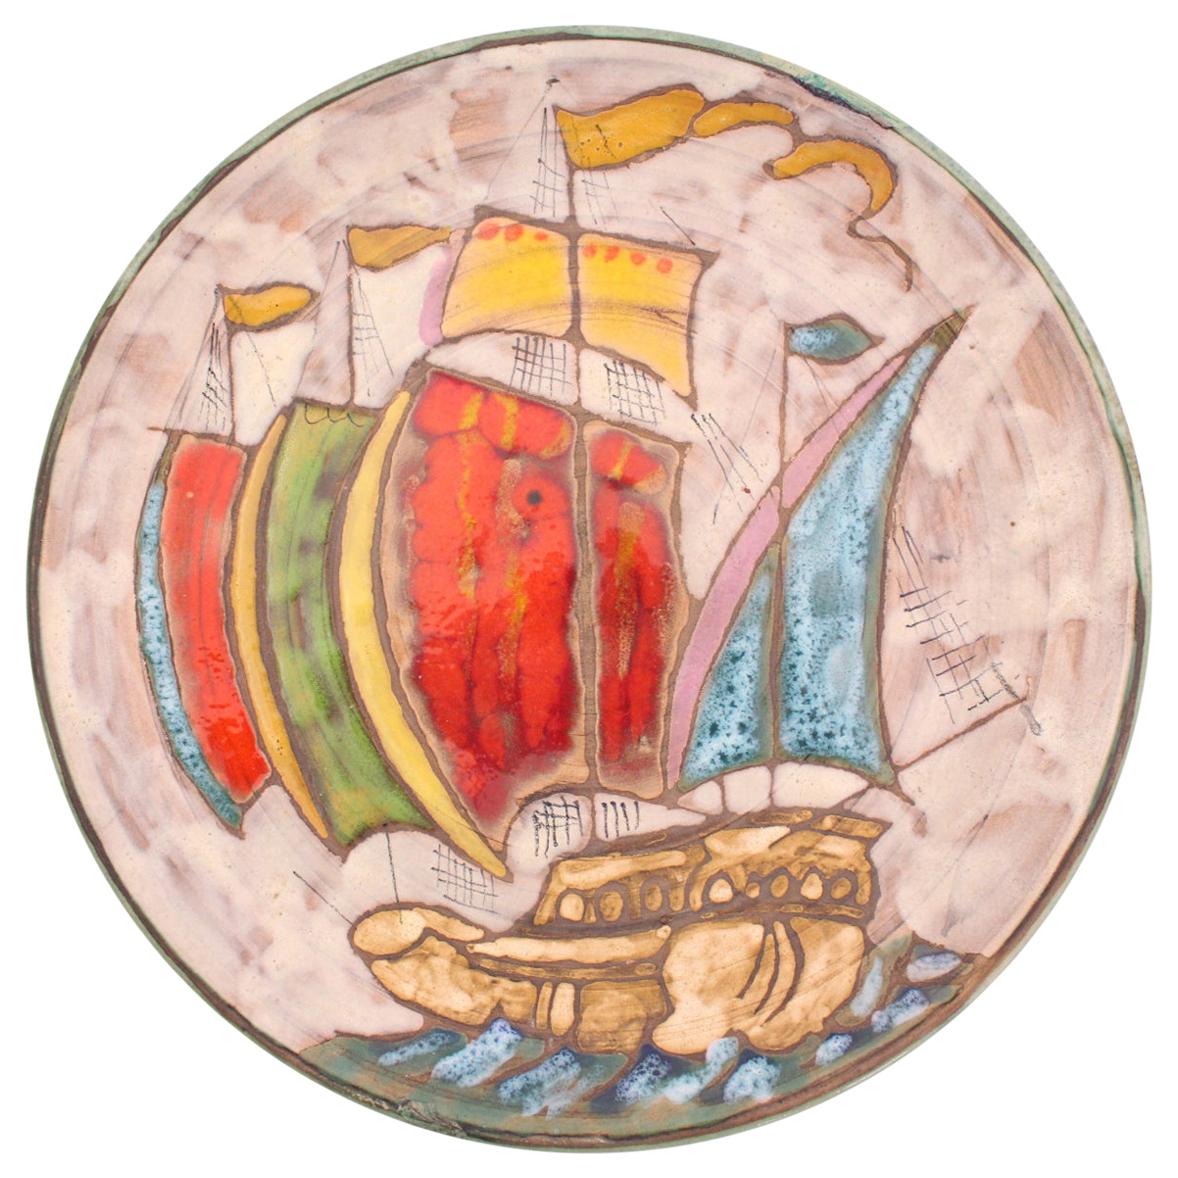 Vallauris Plate Midcentury Galleon One of a Kind Hand Decorated Studio Pottery